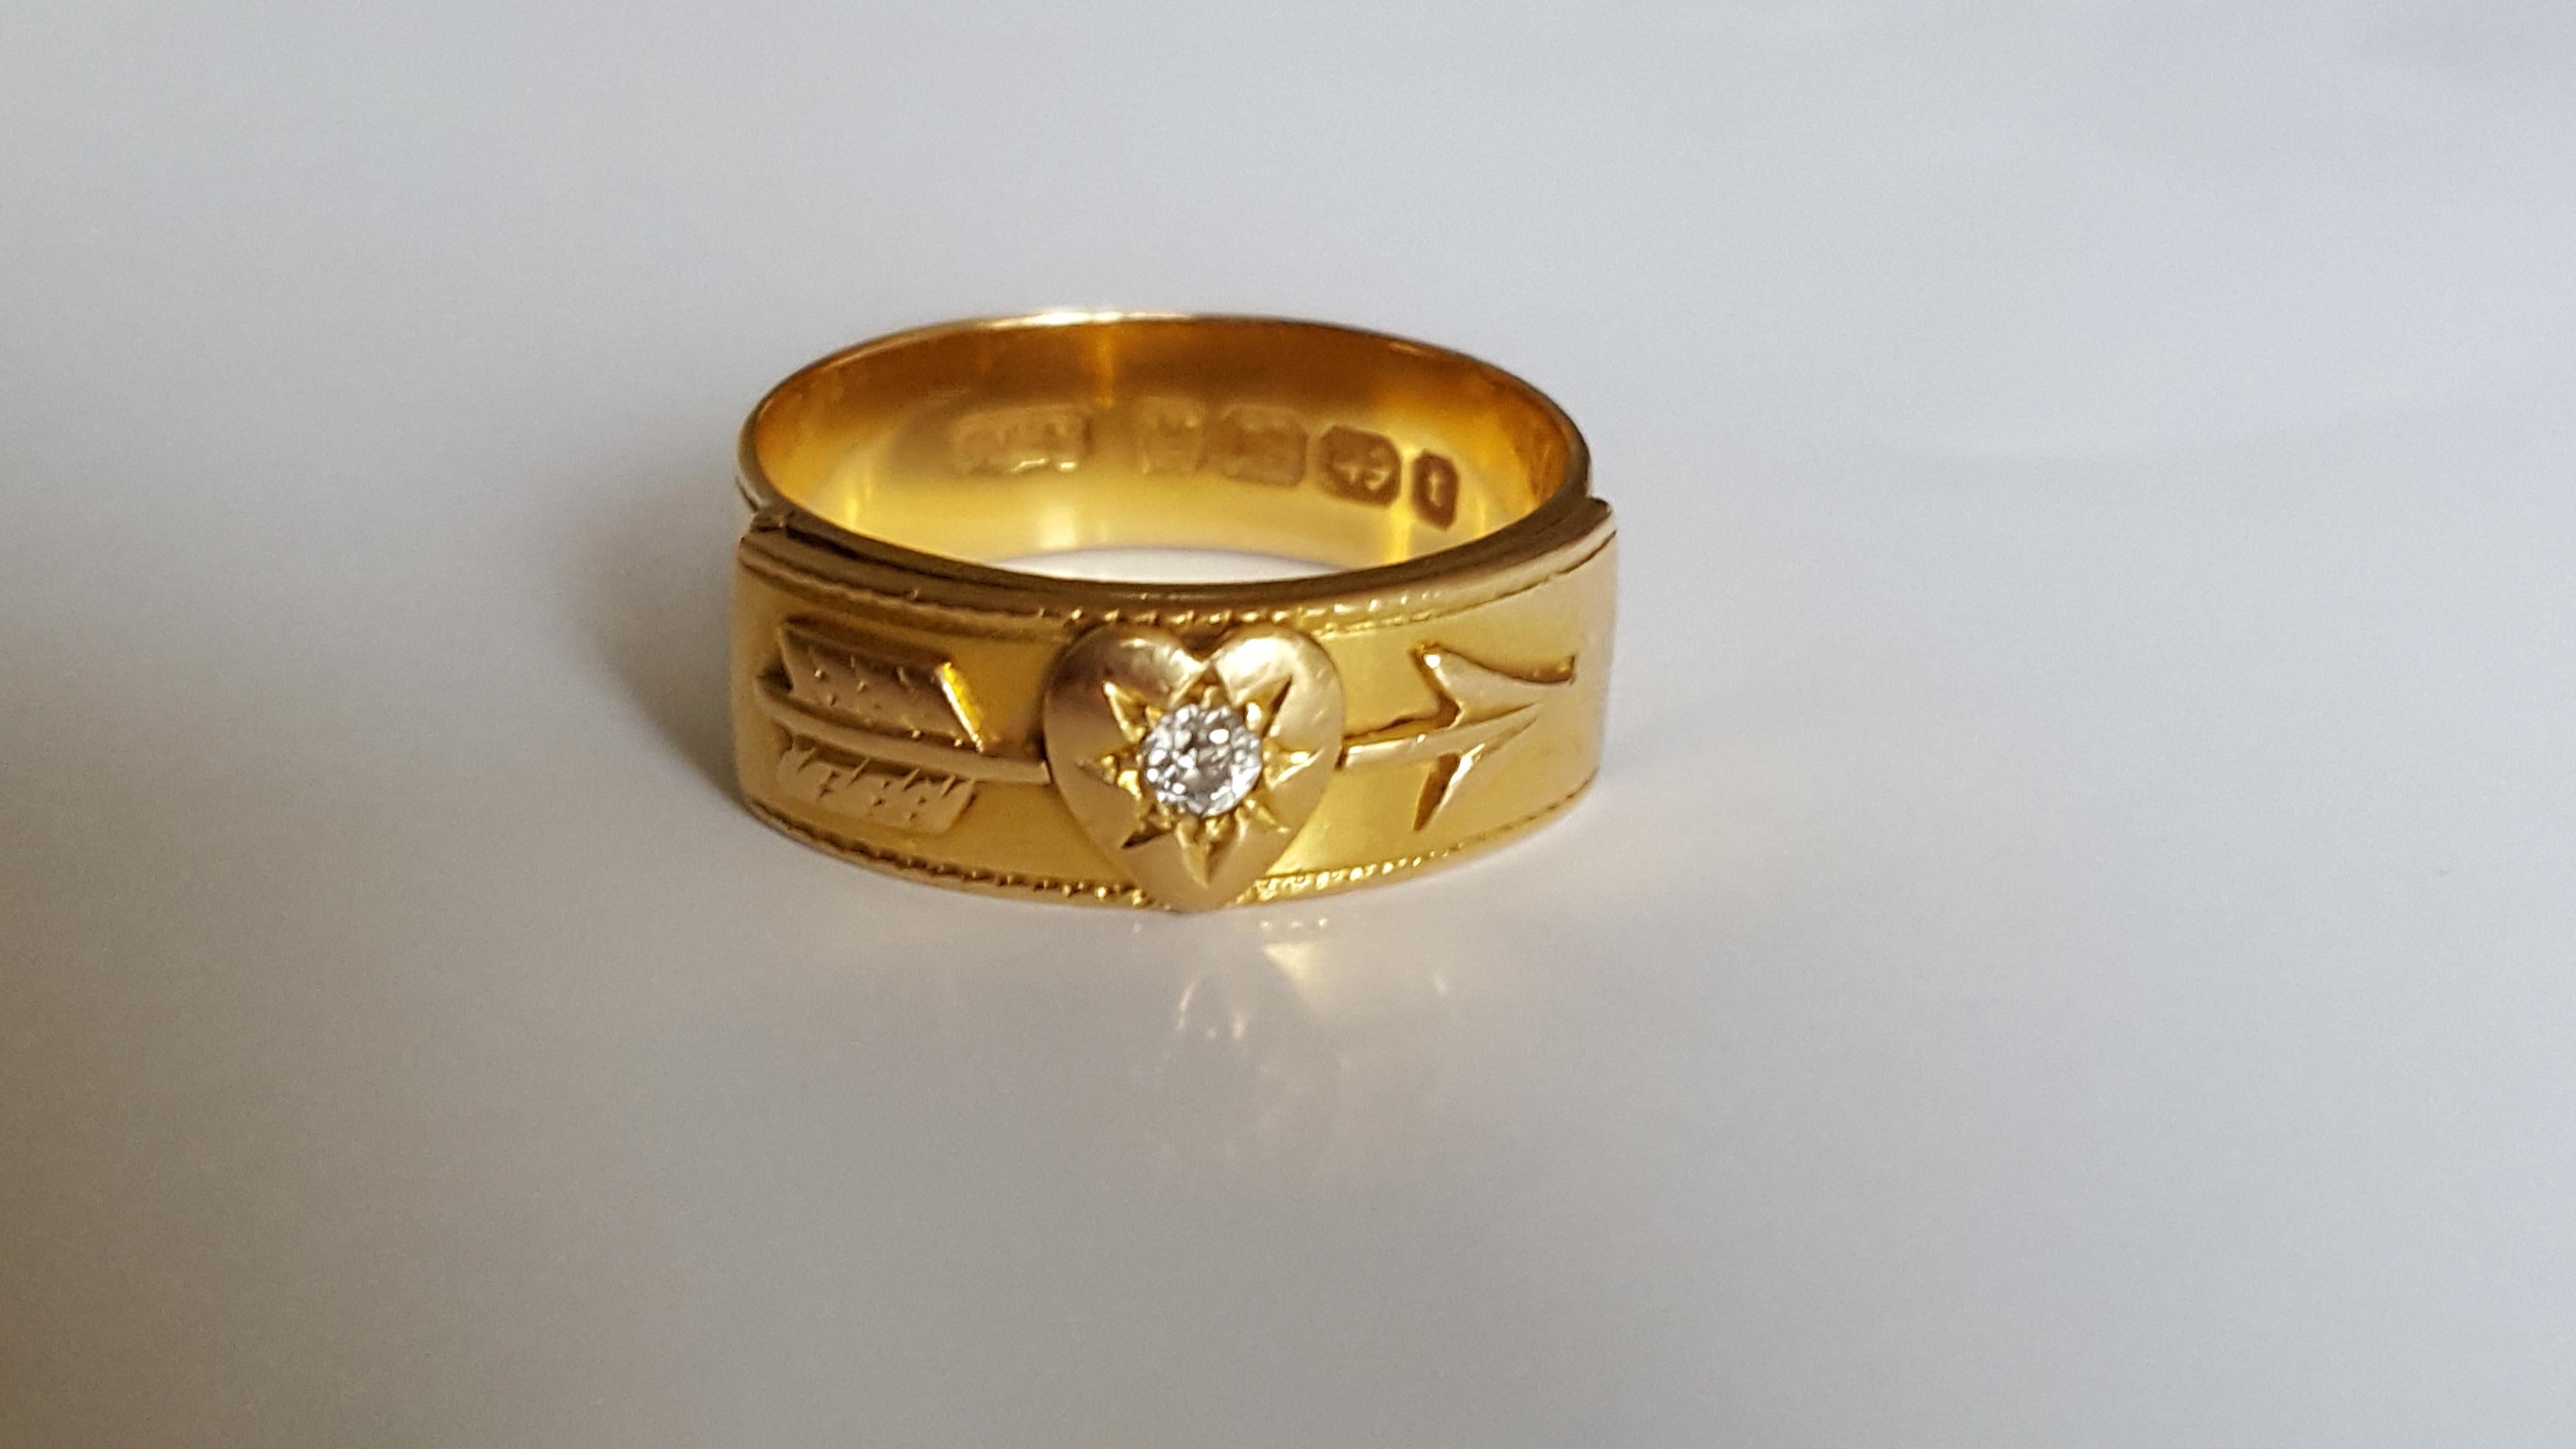 A Rare Victorian 18 Carat Gold and Diamond MIZPAH locket ring. English origin.
Size M UK, 6.5 US
Width 6mm.
Full English Birmingham hallmark for 18 Carat Gold and dated 1893.
In perfect working order.